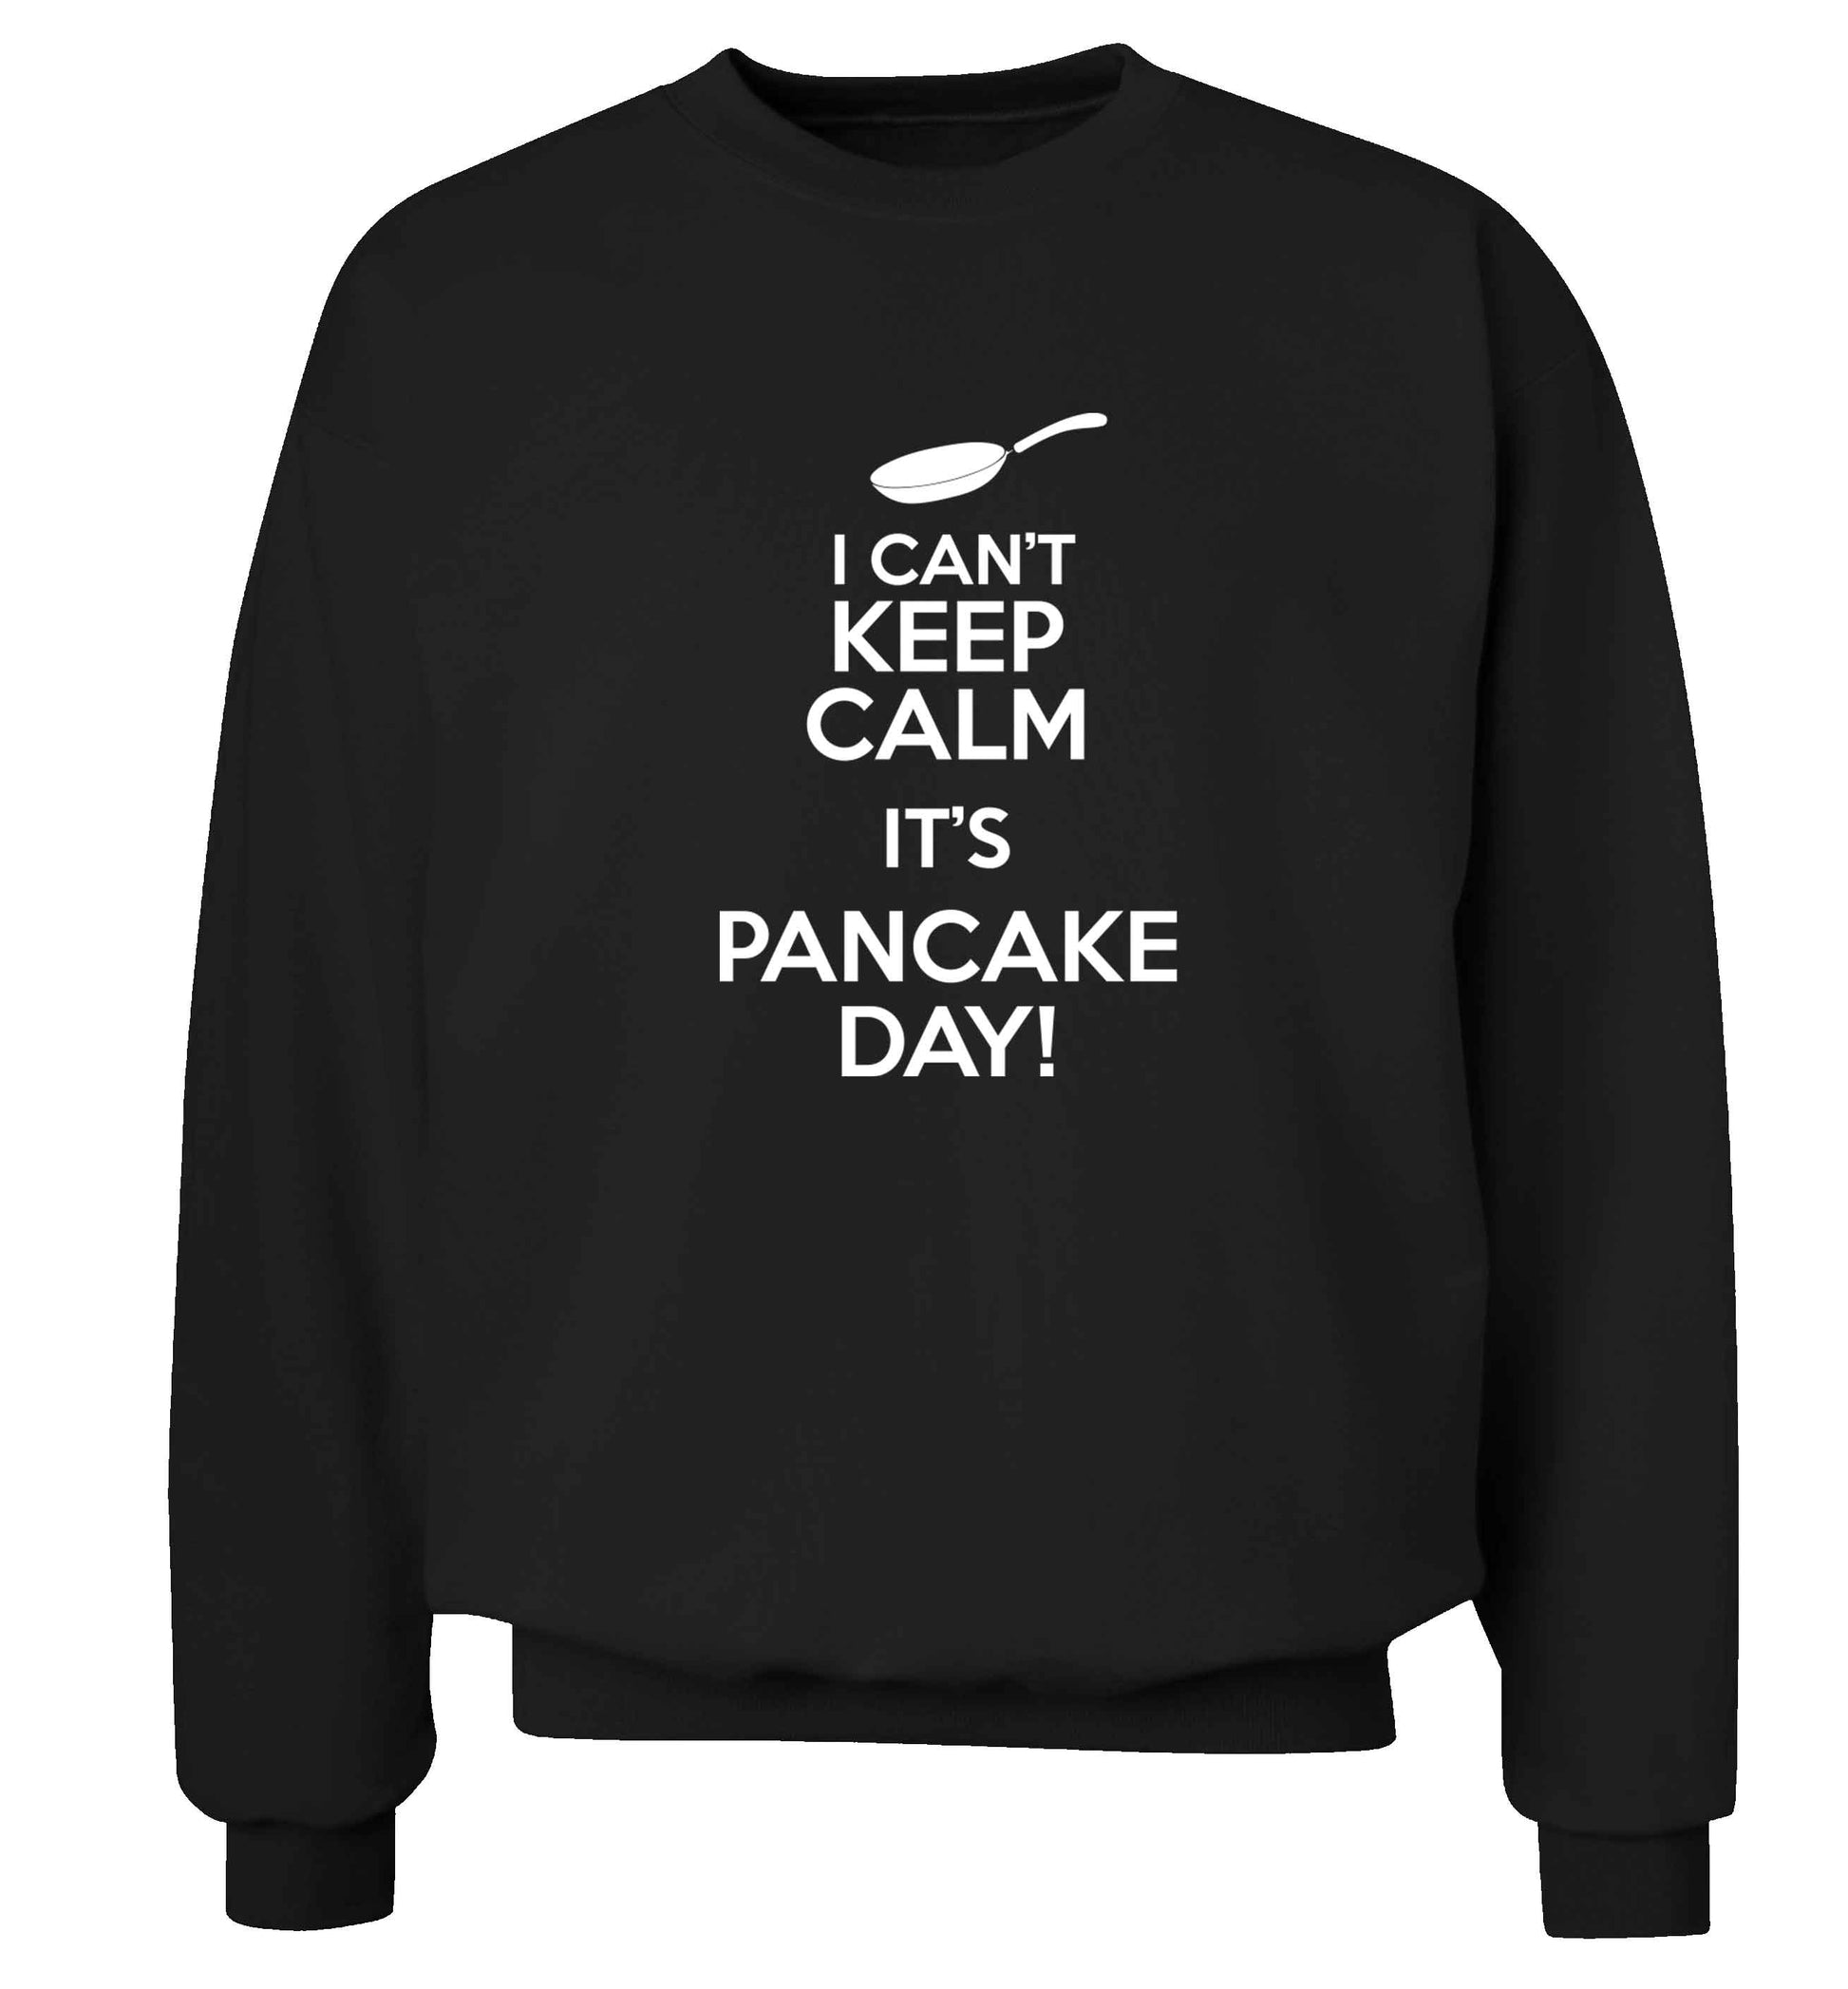 I can't keep calm it's pancake day! adult's unisex black sweater 2XL